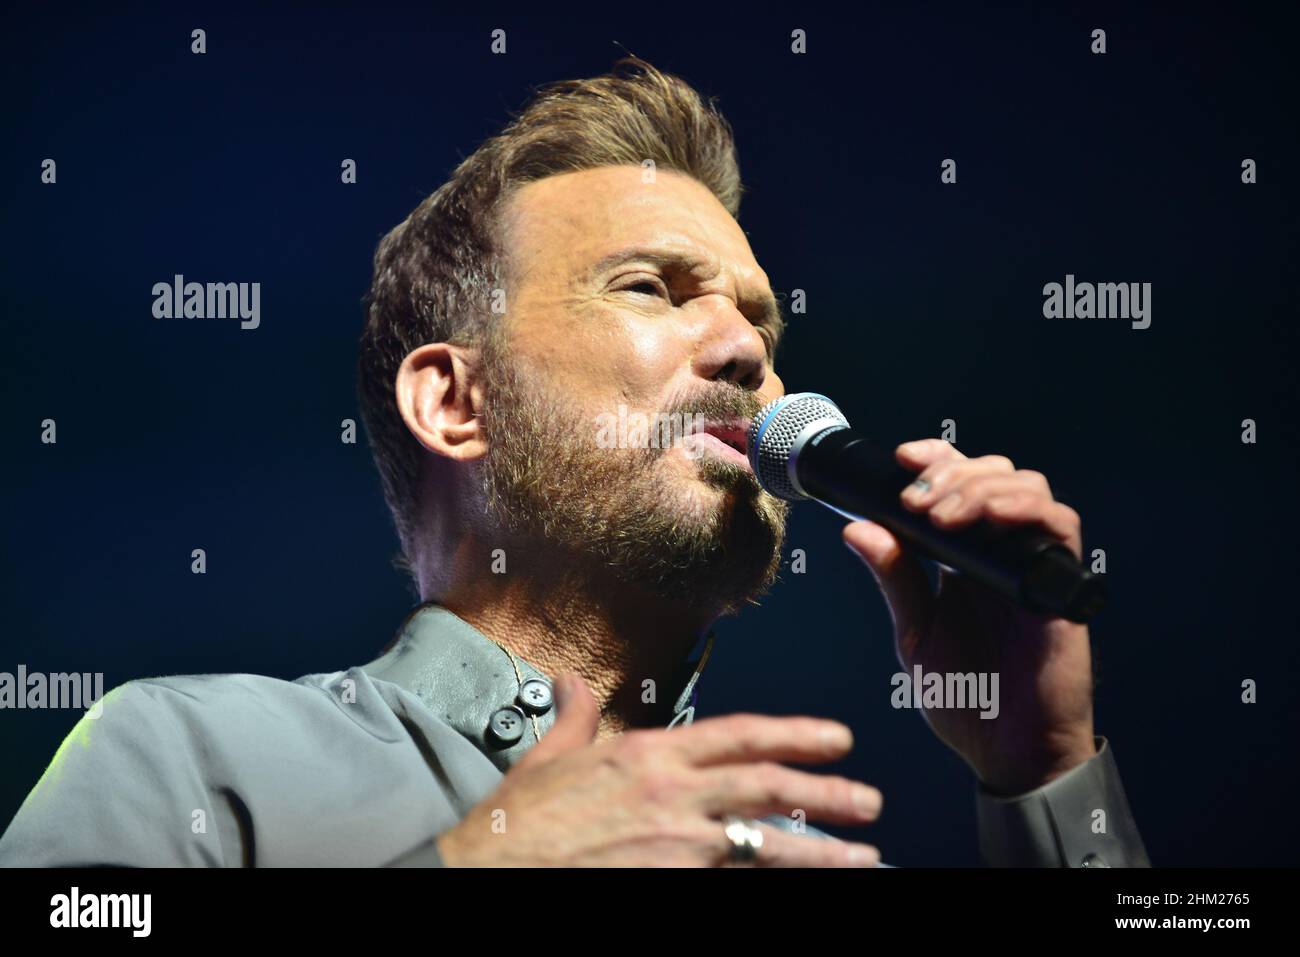 MIAMI, FL - FEBRUARY 05: Willy Chirino performs live on stage at James L. Knight Center on February 05, 2022 in Miami, Florida. (Photo by JL/Sipa USA) Credit: Sipa USA/Alamy Live News Stock Photo